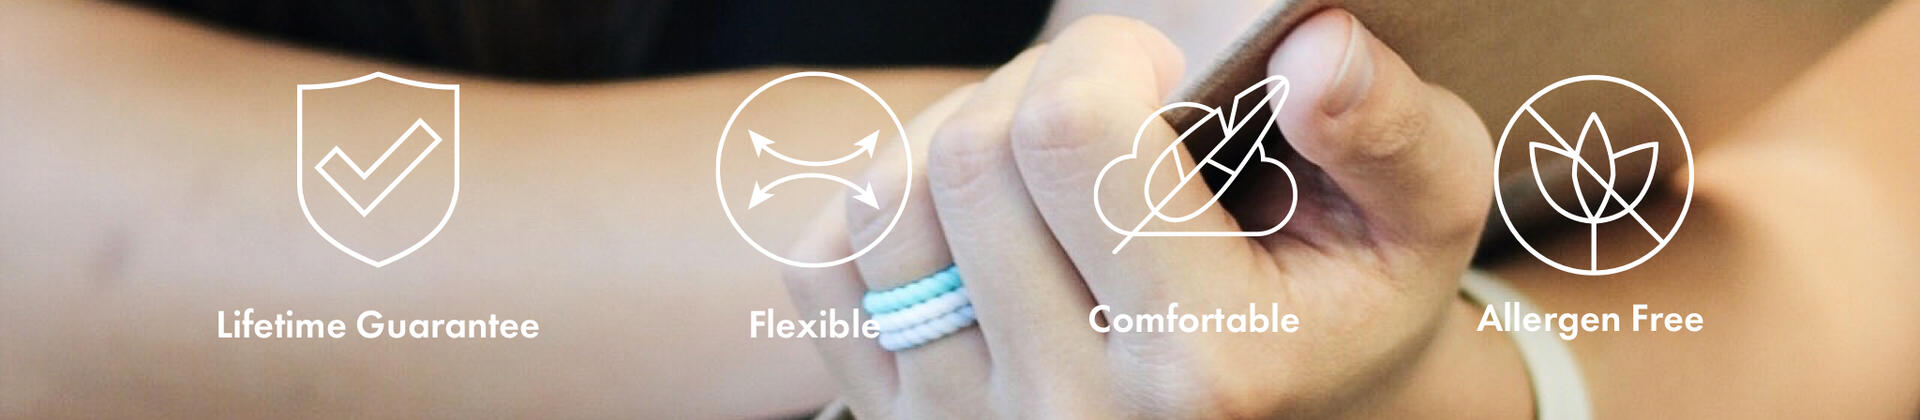 Enso silicone rings have a lifetime guarantee, are flexible, comfortable, and allergen free!